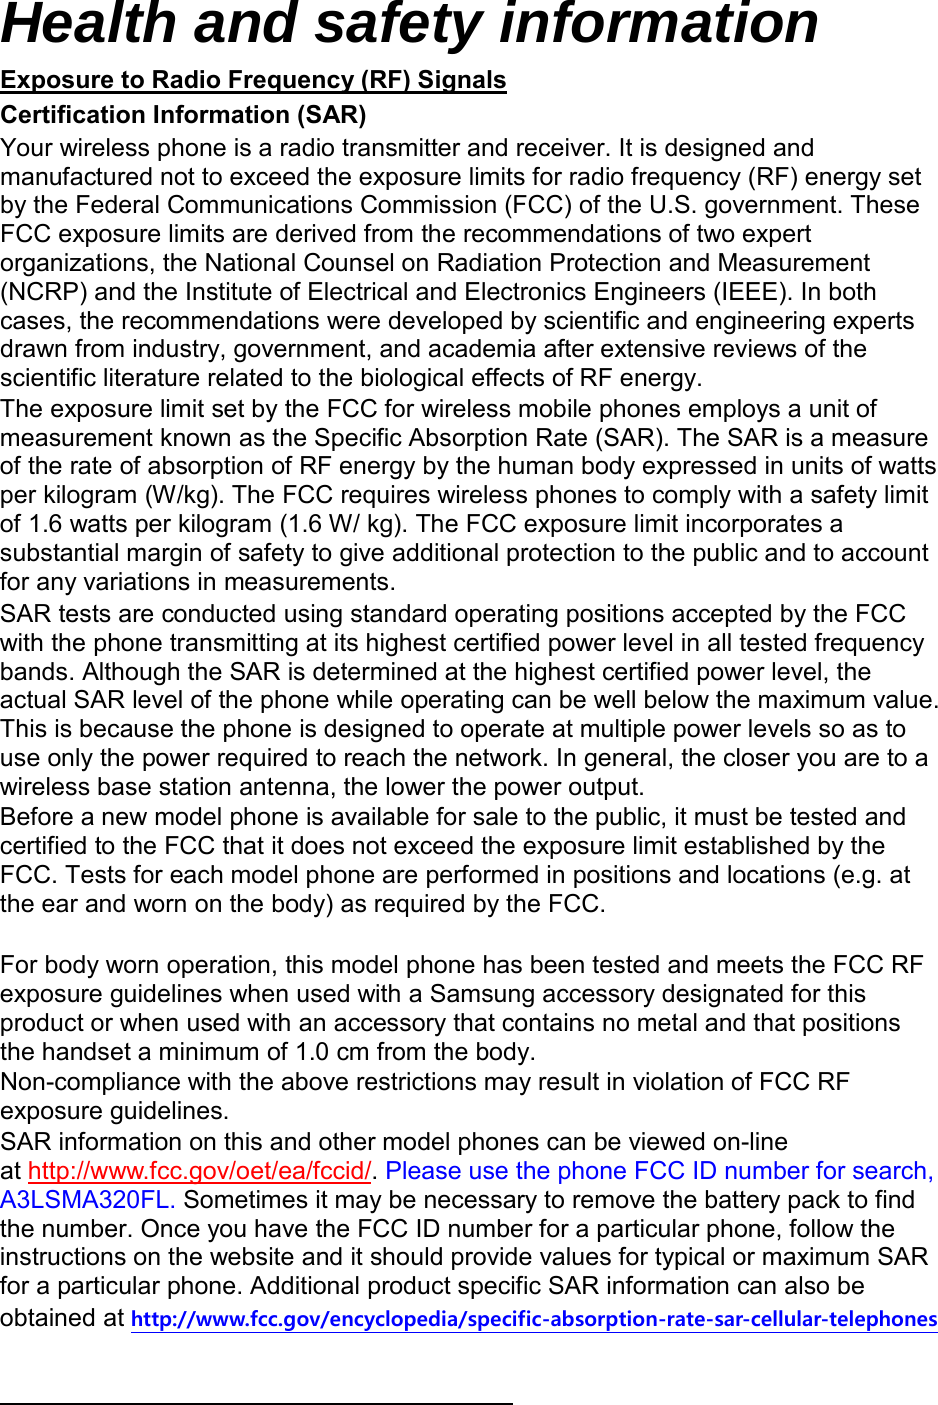 Health and safety information Certification Information (SAR) Exposure to Radio Frequency (RF) Signals Your wireless phone is a radio transmitter and receiver. It is designed and manufactured not to exceed the exposure limits for radio frequency (RF) energy set by the Federal Communications Commission (FCC) of the U.S. government. These FCC exposure limits are derived from the recommendations of two expert organizations, the National Counsel on Radiation Protection and Measurement (NCRP) and the Institute of Electrical and Electronics Engineers (IEEE). In both cases, the recommendations were developed by scientific and engineering experts drawn from industry, government, and academia after extensive reviews of the scientific literature related to the biological effects of RF energy. The exposure limit set by the FCC for wireless mobile phones employs a unit of measurement known as the Specific Absorption Rate (SAR). The SAR is a measure of the rate of absorption of RF energy by the human body expressed in units of watts per kilogram (W/kg). The FCC requires wireless phones to comply with a safety limit of 1.6 watts per kilogram (1.6 W/ kg). The FCC exposure limit incorporates a substantial margin of safety to give additional protection to the public and to account for any variations in measurements. SAR tests are conducted using standard operating positions accepted by the FCC with the phone transmitting at its highest certified power level in all tested frequency bands. Although the SAR is determined at the highest certified power level, the actual SAR level of the phone while operating can be well below the maximum value. This is because the phone is designed to operate at multiple power levels so as to use only the power required to reach the network. In general, the closer you are to a wireless base station antenna, the lower the power output. Before a new model phone is available for sale to the public, it must be tested and certified to the FCC that it does not exceed the exposure limit established by the FCC. Tests for each model phone are performed in positions and locations (e.g. at the ear and worn on the body) as required by the FCC.      For body worn operation, this model phone has been tested and meets the FCC RF exposure guidelines when used with a Samsung accessory designated for this product or when used with an accessory that contains no metal and that positions the handset a minimum of 1.0 cm from the body.   Non-compliance with the above restrictions may result in violation of FCC RF exposure guidelines. SAR information on this and other model phones can be viewed on-line at http://www.fcc.gov/oet/ea/fccid/. Please use the phone FCC ID number for search, A3LSMA320FL. Sometimes it may be necessary to remove the battery pack to find the number. Once you have the FCC ID number for a particular phone, follow the instructions on the website and it should provide values for typical or maximum SAR for a particular phone. Additional product specific SAR information can also be obtained at http://www.fcc.gov/encyclopedia/specific-absorption-rate-sar-cellular-telephones  